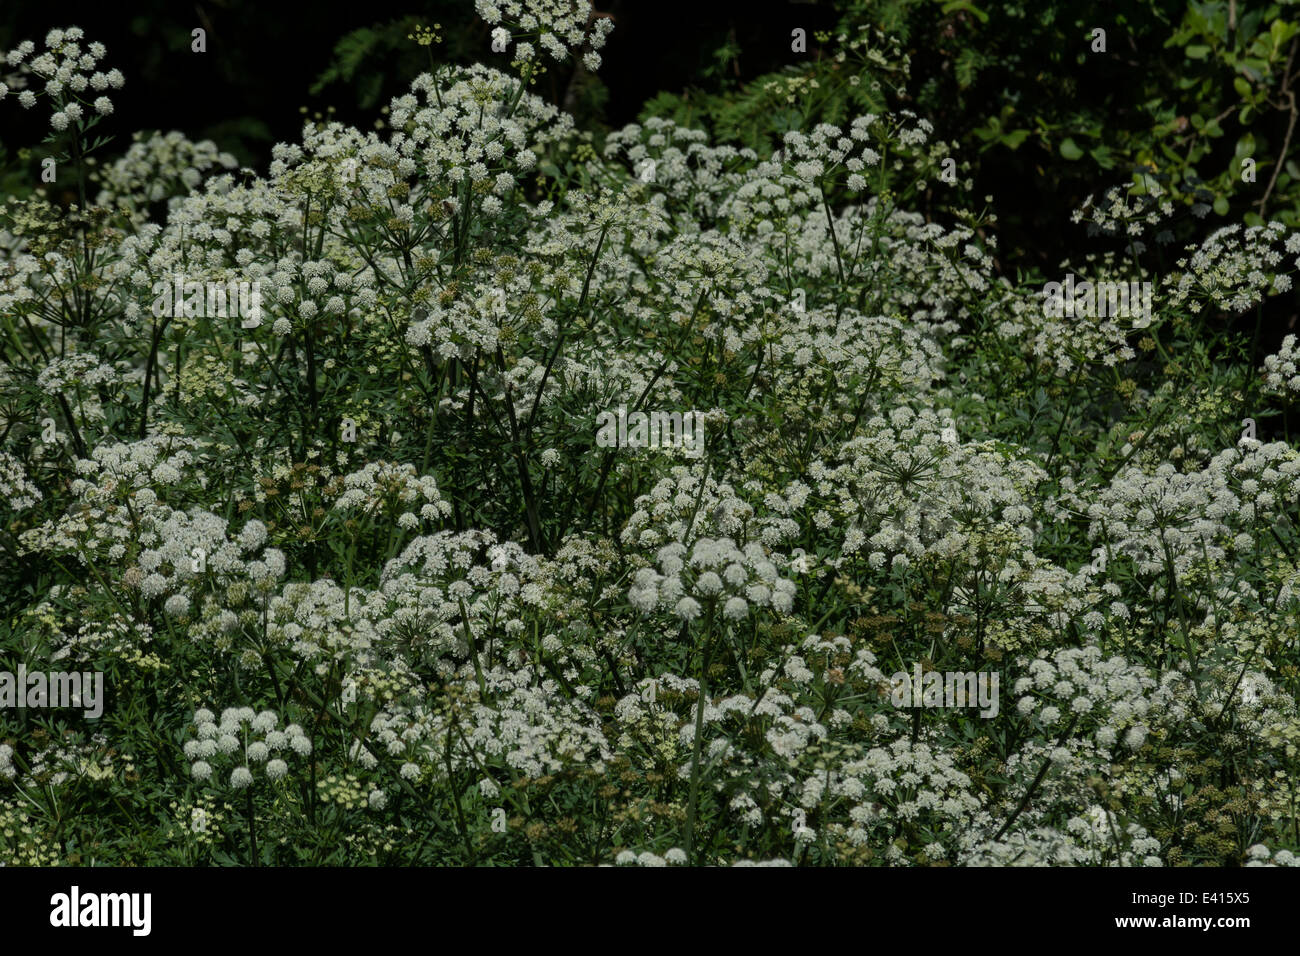 Mass of poisonous Water Dropwort in flower beside river. Flowers at the very bottom and back of the group are soft. One of UK's most poisonous plants. Stock Photo